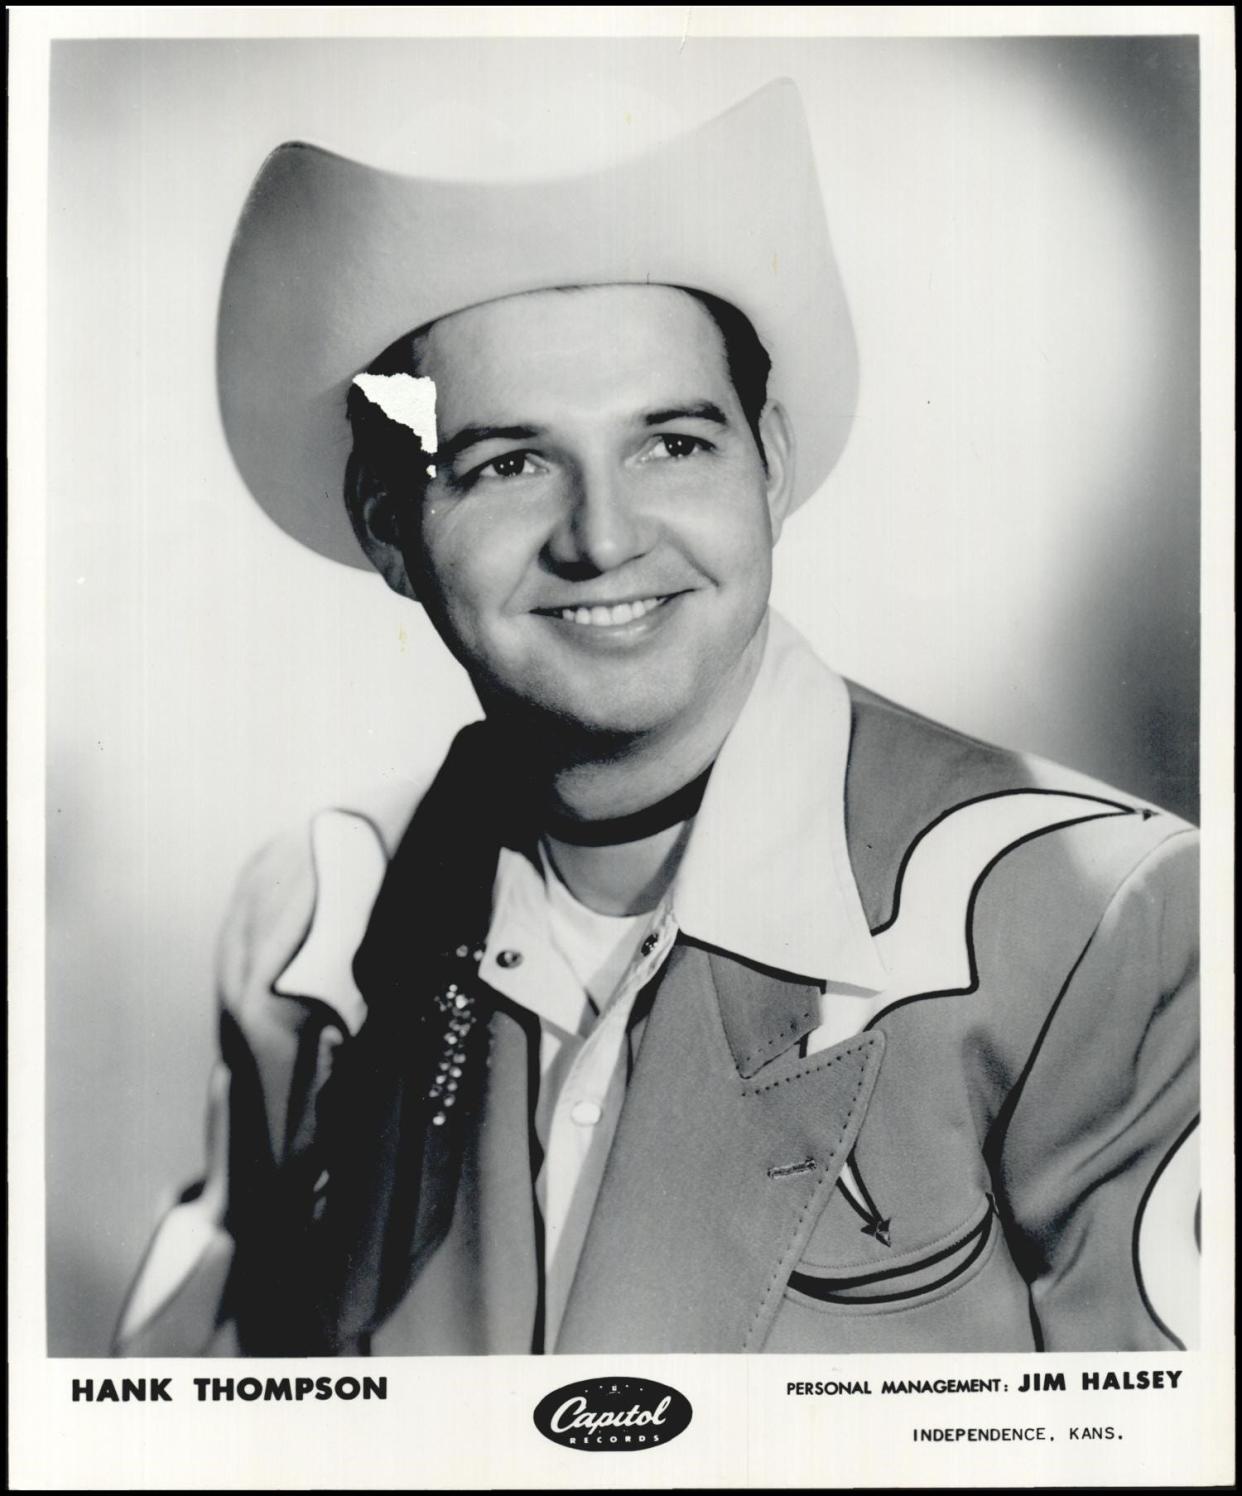 Hank Thompson, shown in a promotional photo from 1956, helped Jude 'n' Jody along by asking them to tour with him.